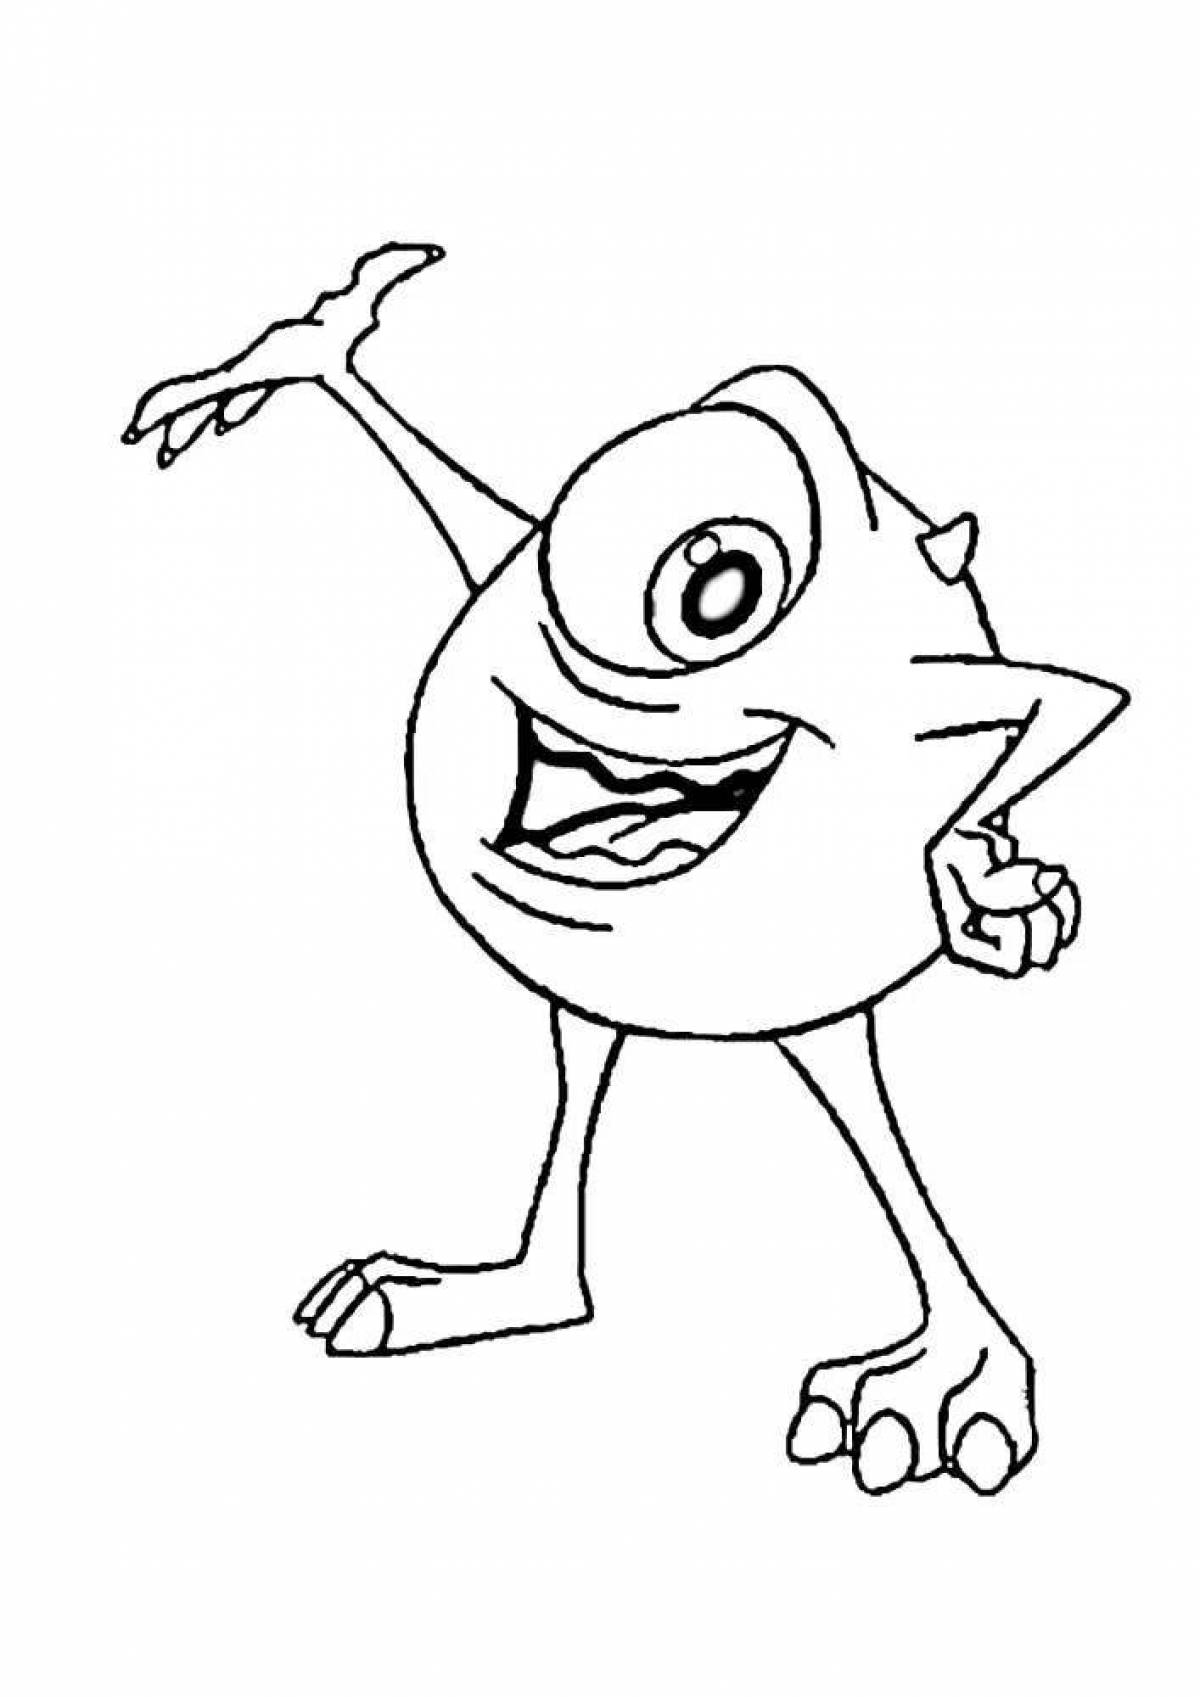 Excited mike wazowski coloring page